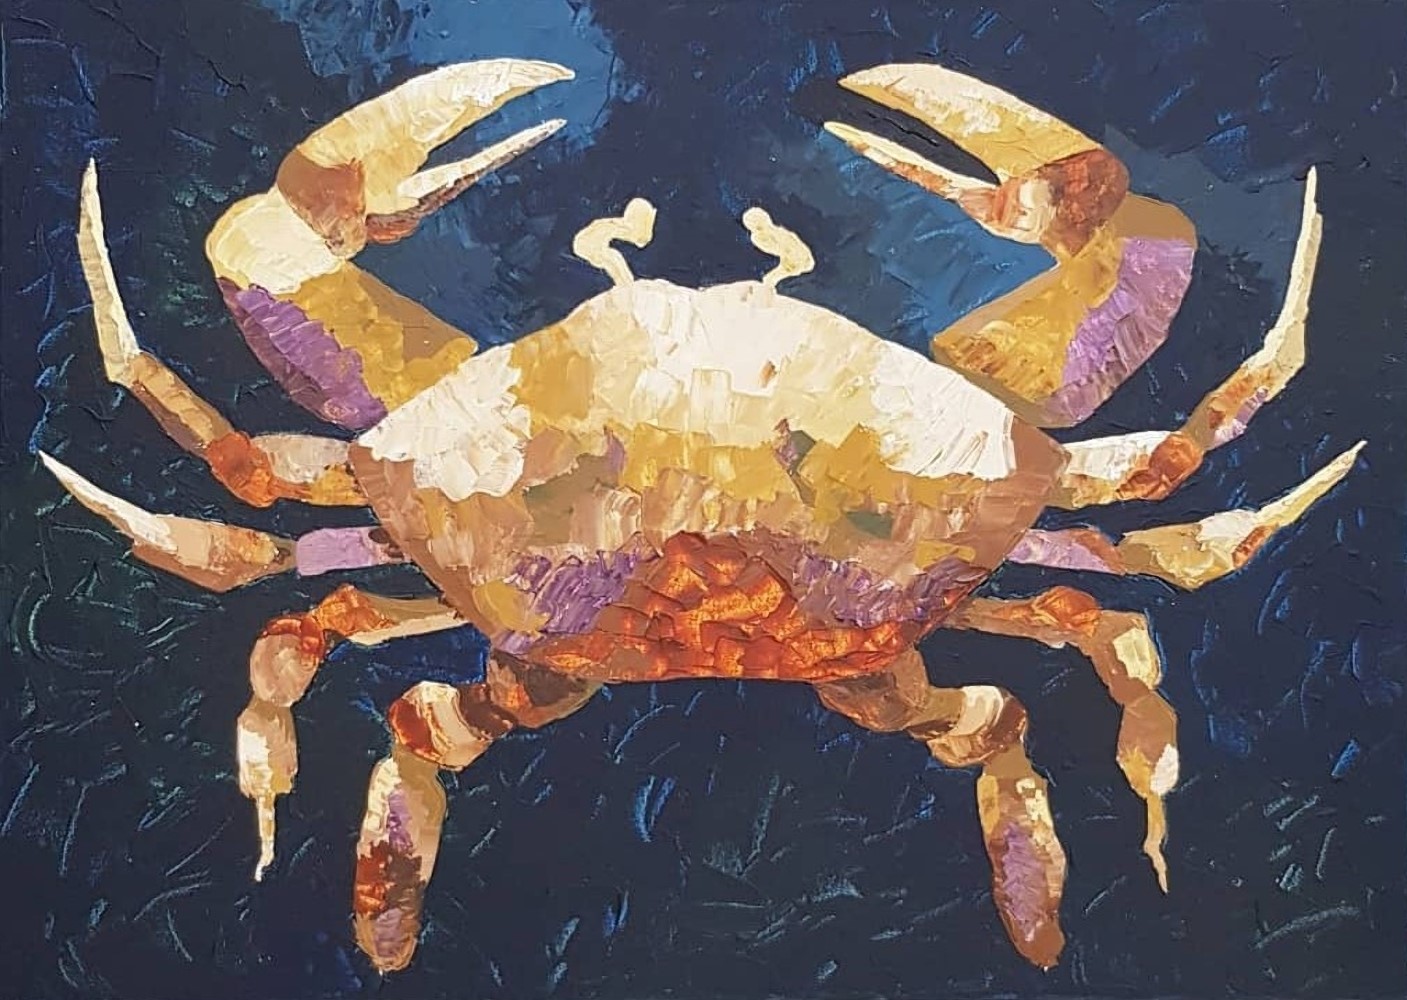 The Merry Crab